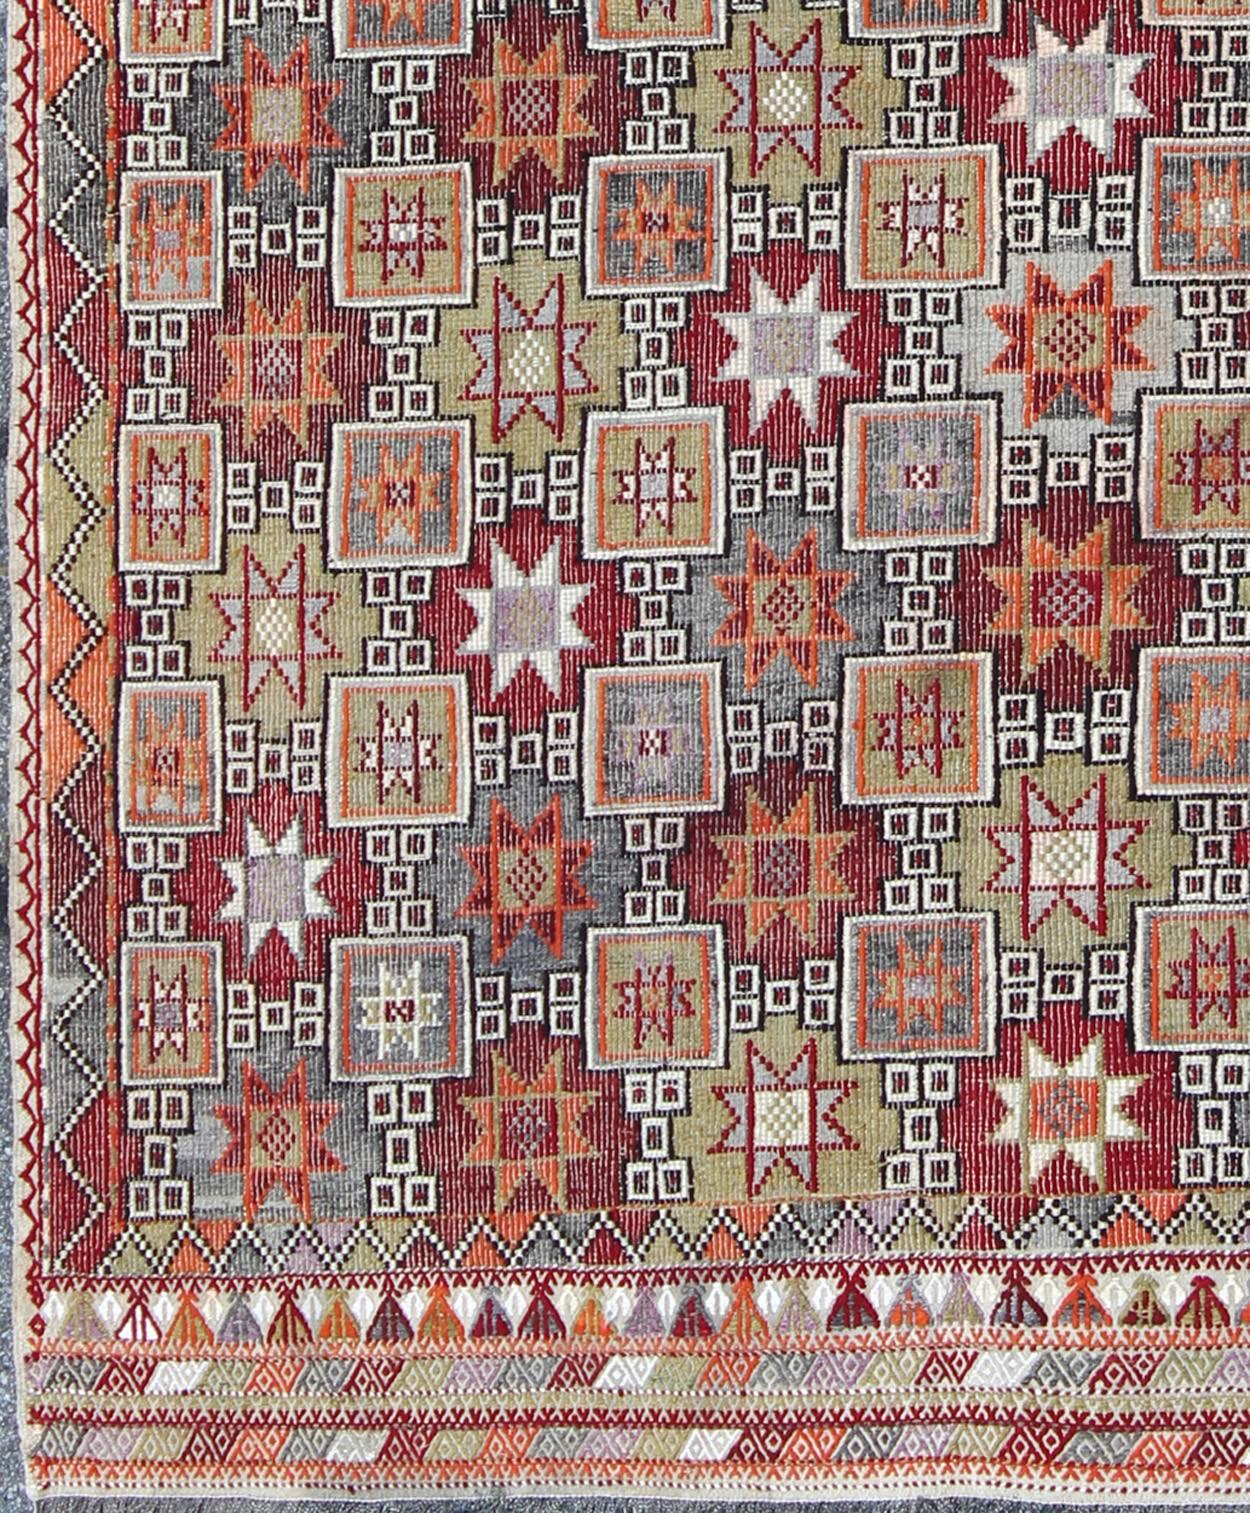 Turkish Vintage Embroidered Kilim Rug With Tribal Star Shapes in Colorful tones, rug / Tu-Ned-012787,  Turkish Vintage Embroidered Kilim, Featuring tribal shapes of stars and boxes with a spotted and speckled assortment of geometric elements, this